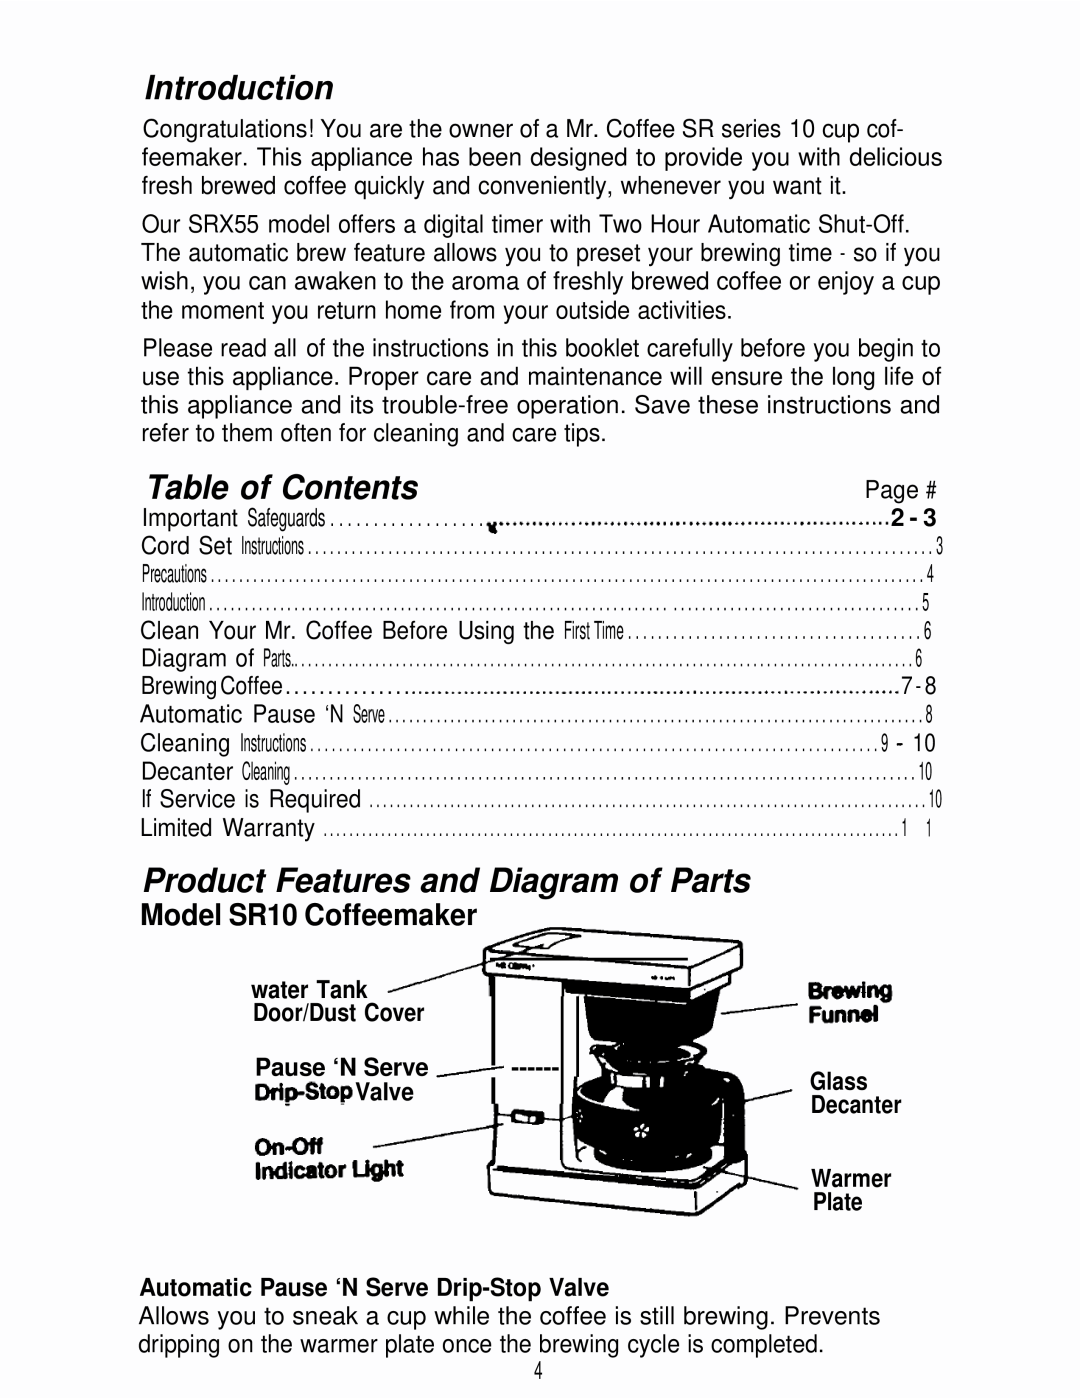 Mr. Coffee SRX55 manual Introduction, Table of Contents, Product Features and Diagram of Parts, Model SR10 Coffeemaker 